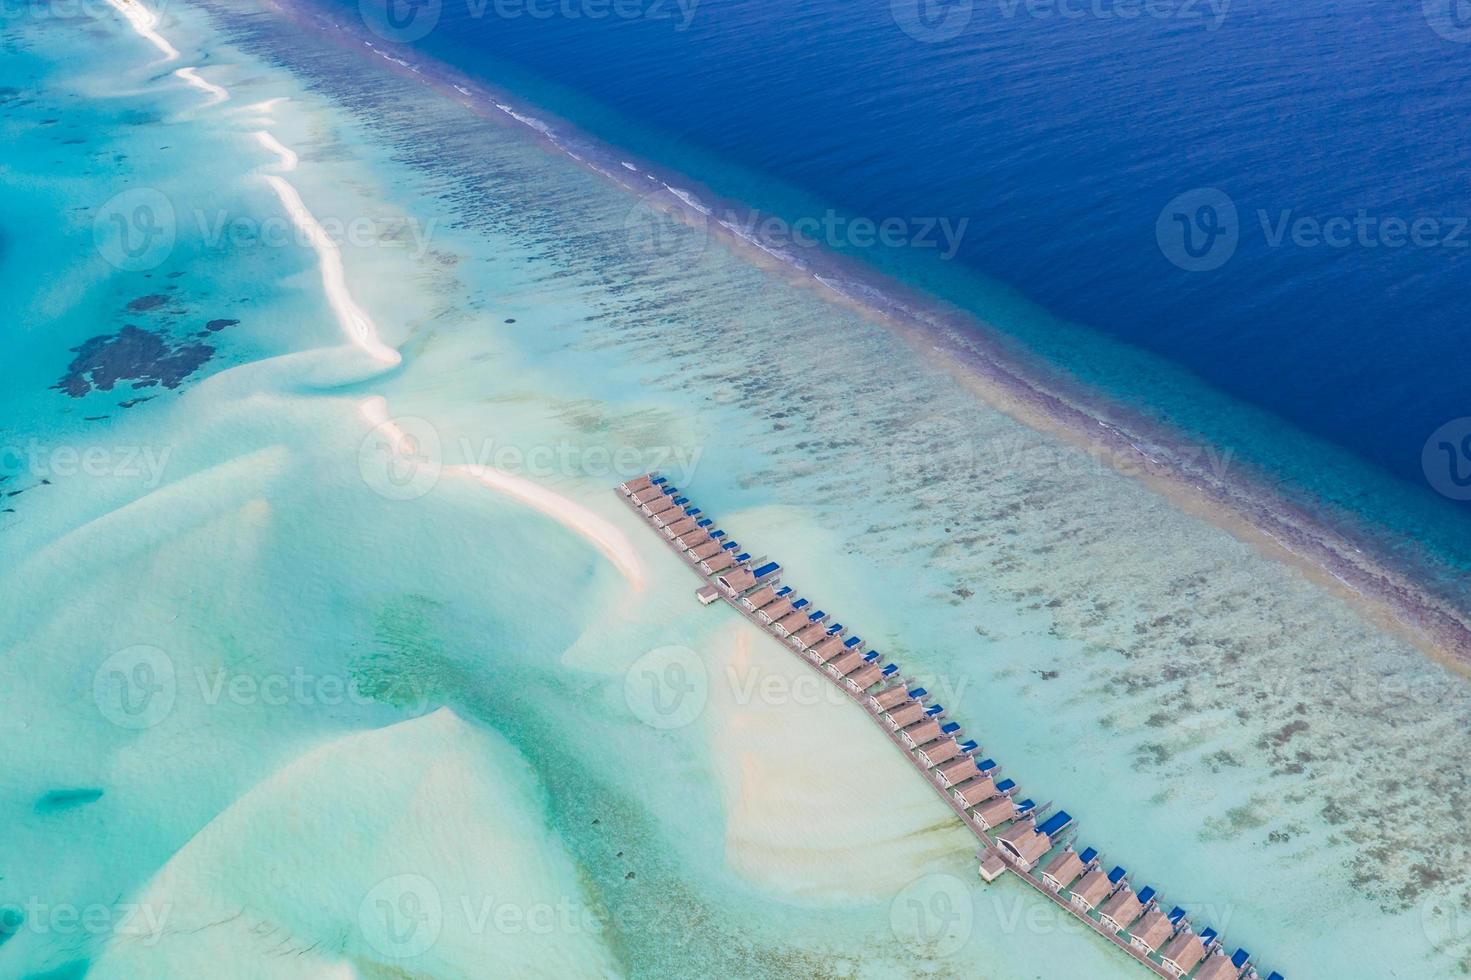 Aerial view on Maldives island. Beautiful sea and coral reef with luxury water villas. Tropical resort, amazing exotic landscape. Summer vacation beach and holiday scenery. Tourism destination photo